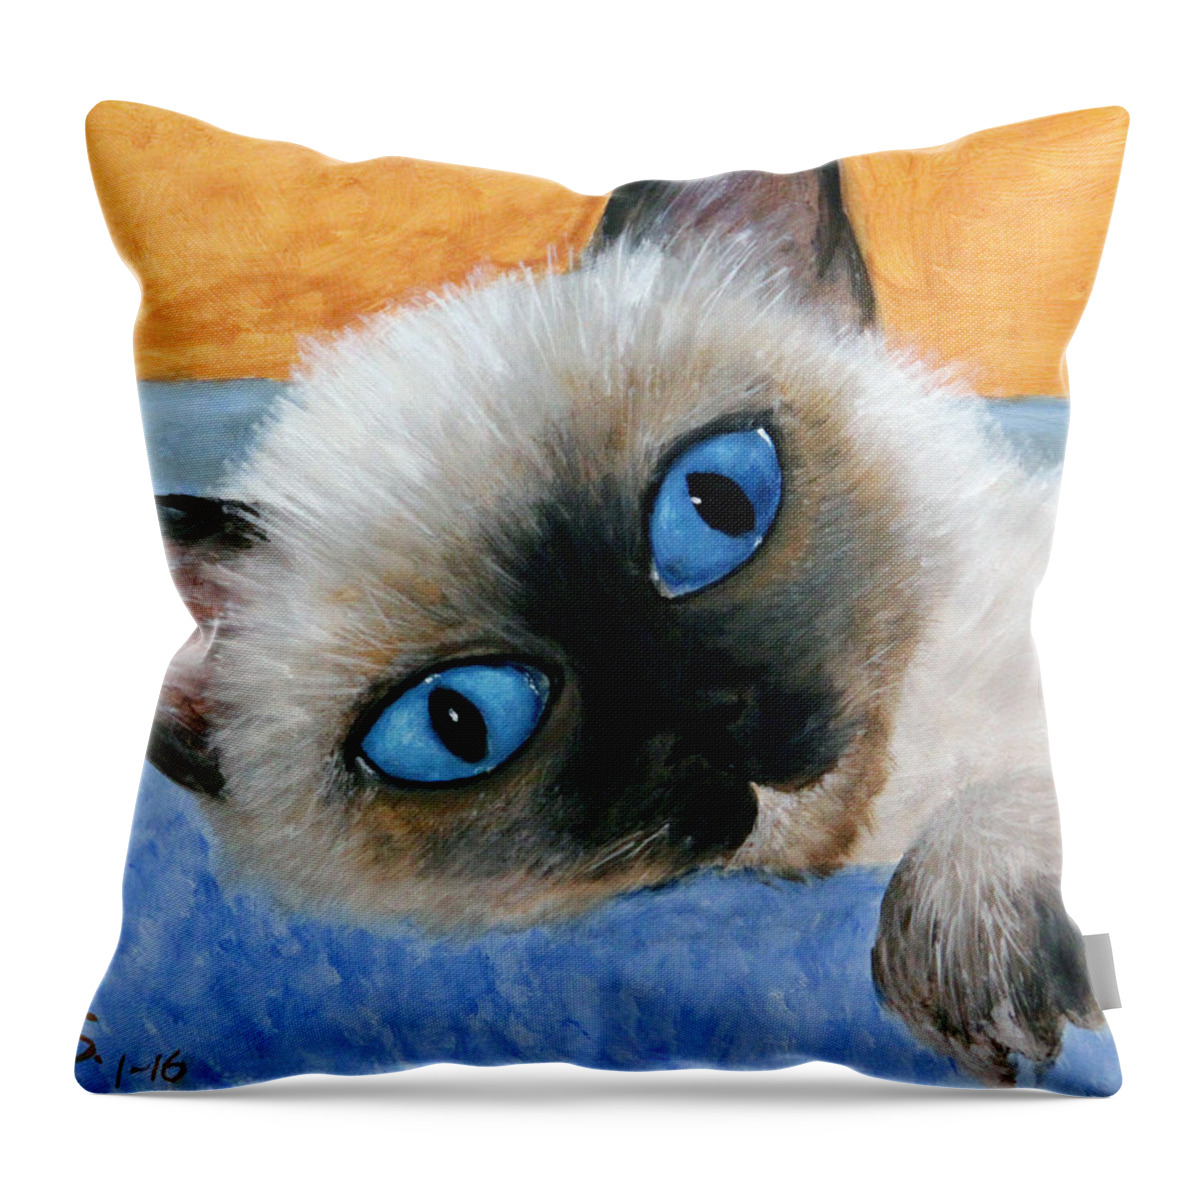 Kitty Throw Pillow featuring the painting Sweet Kitty Blue Eyes by Janet Greer Sammons